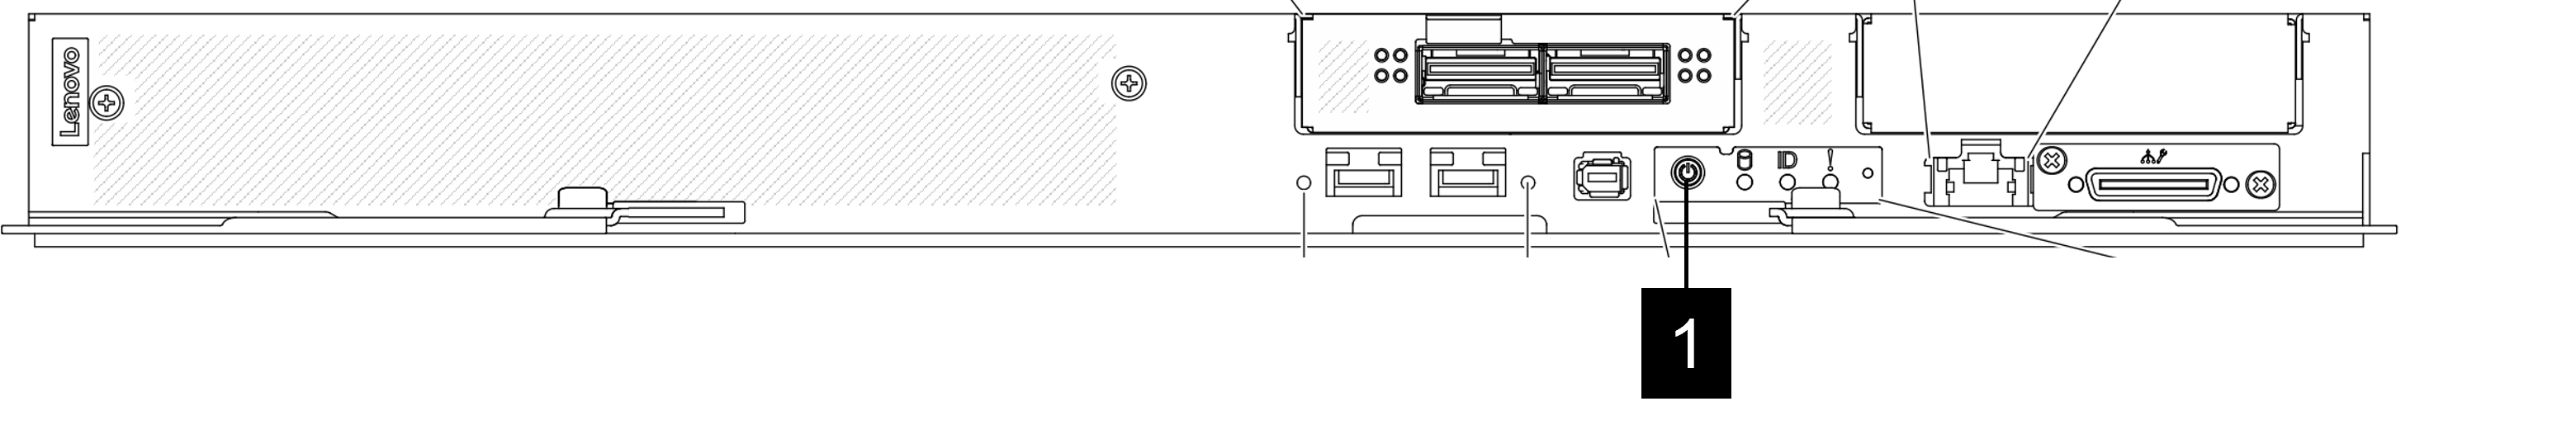 SD650-N V3 power button location